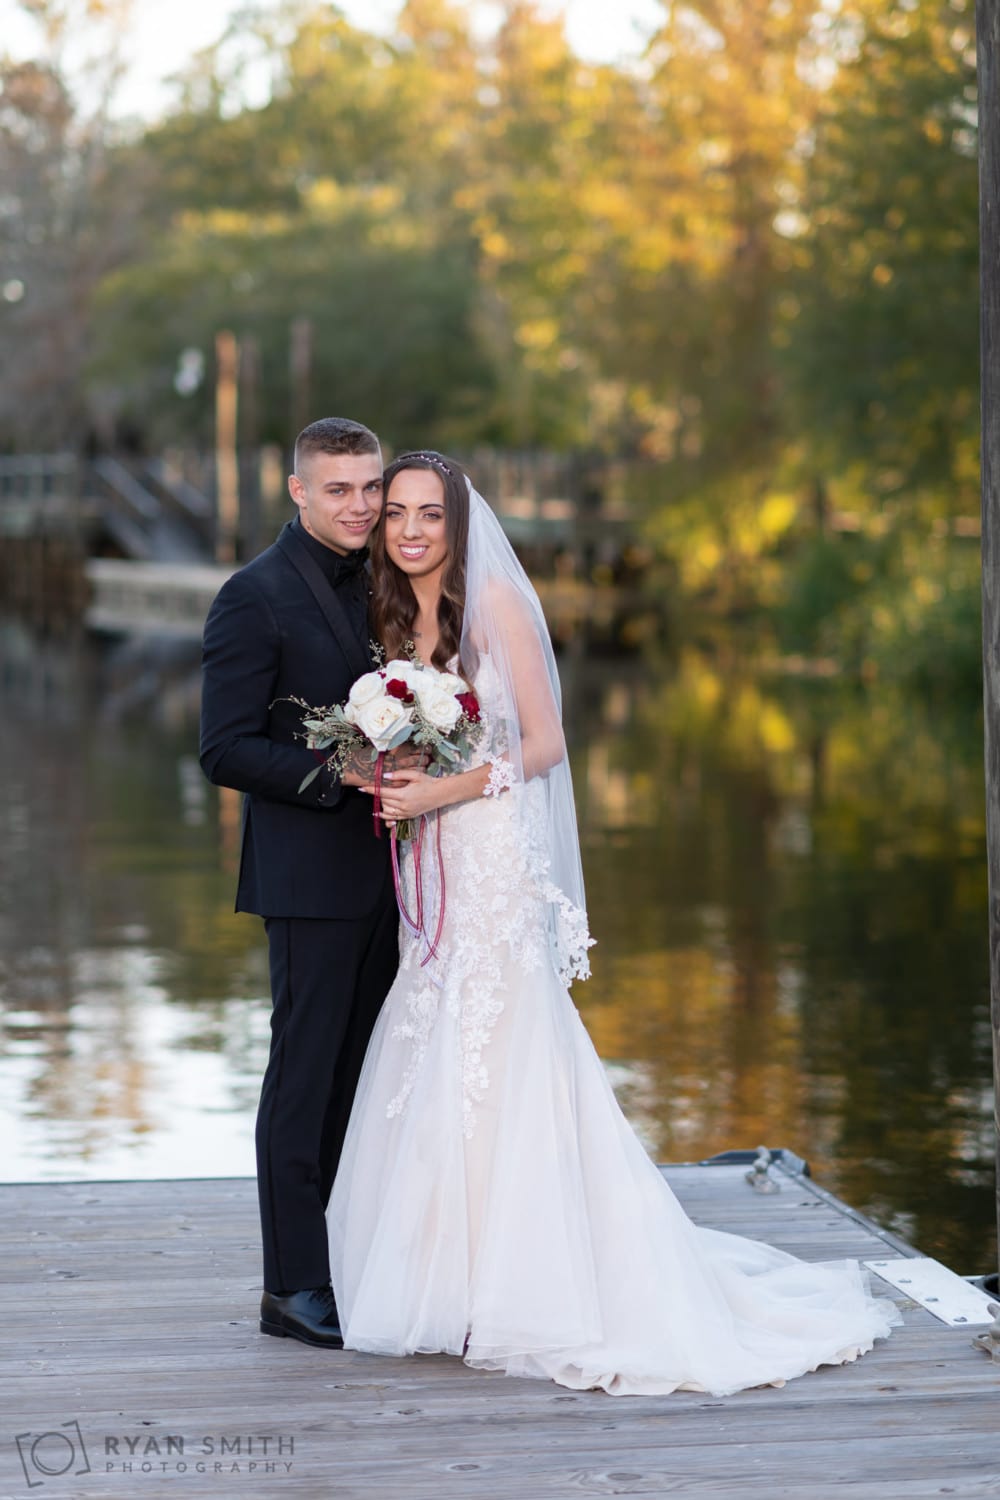 Bride and groom embracing on the dock by the water - Conway River Walk